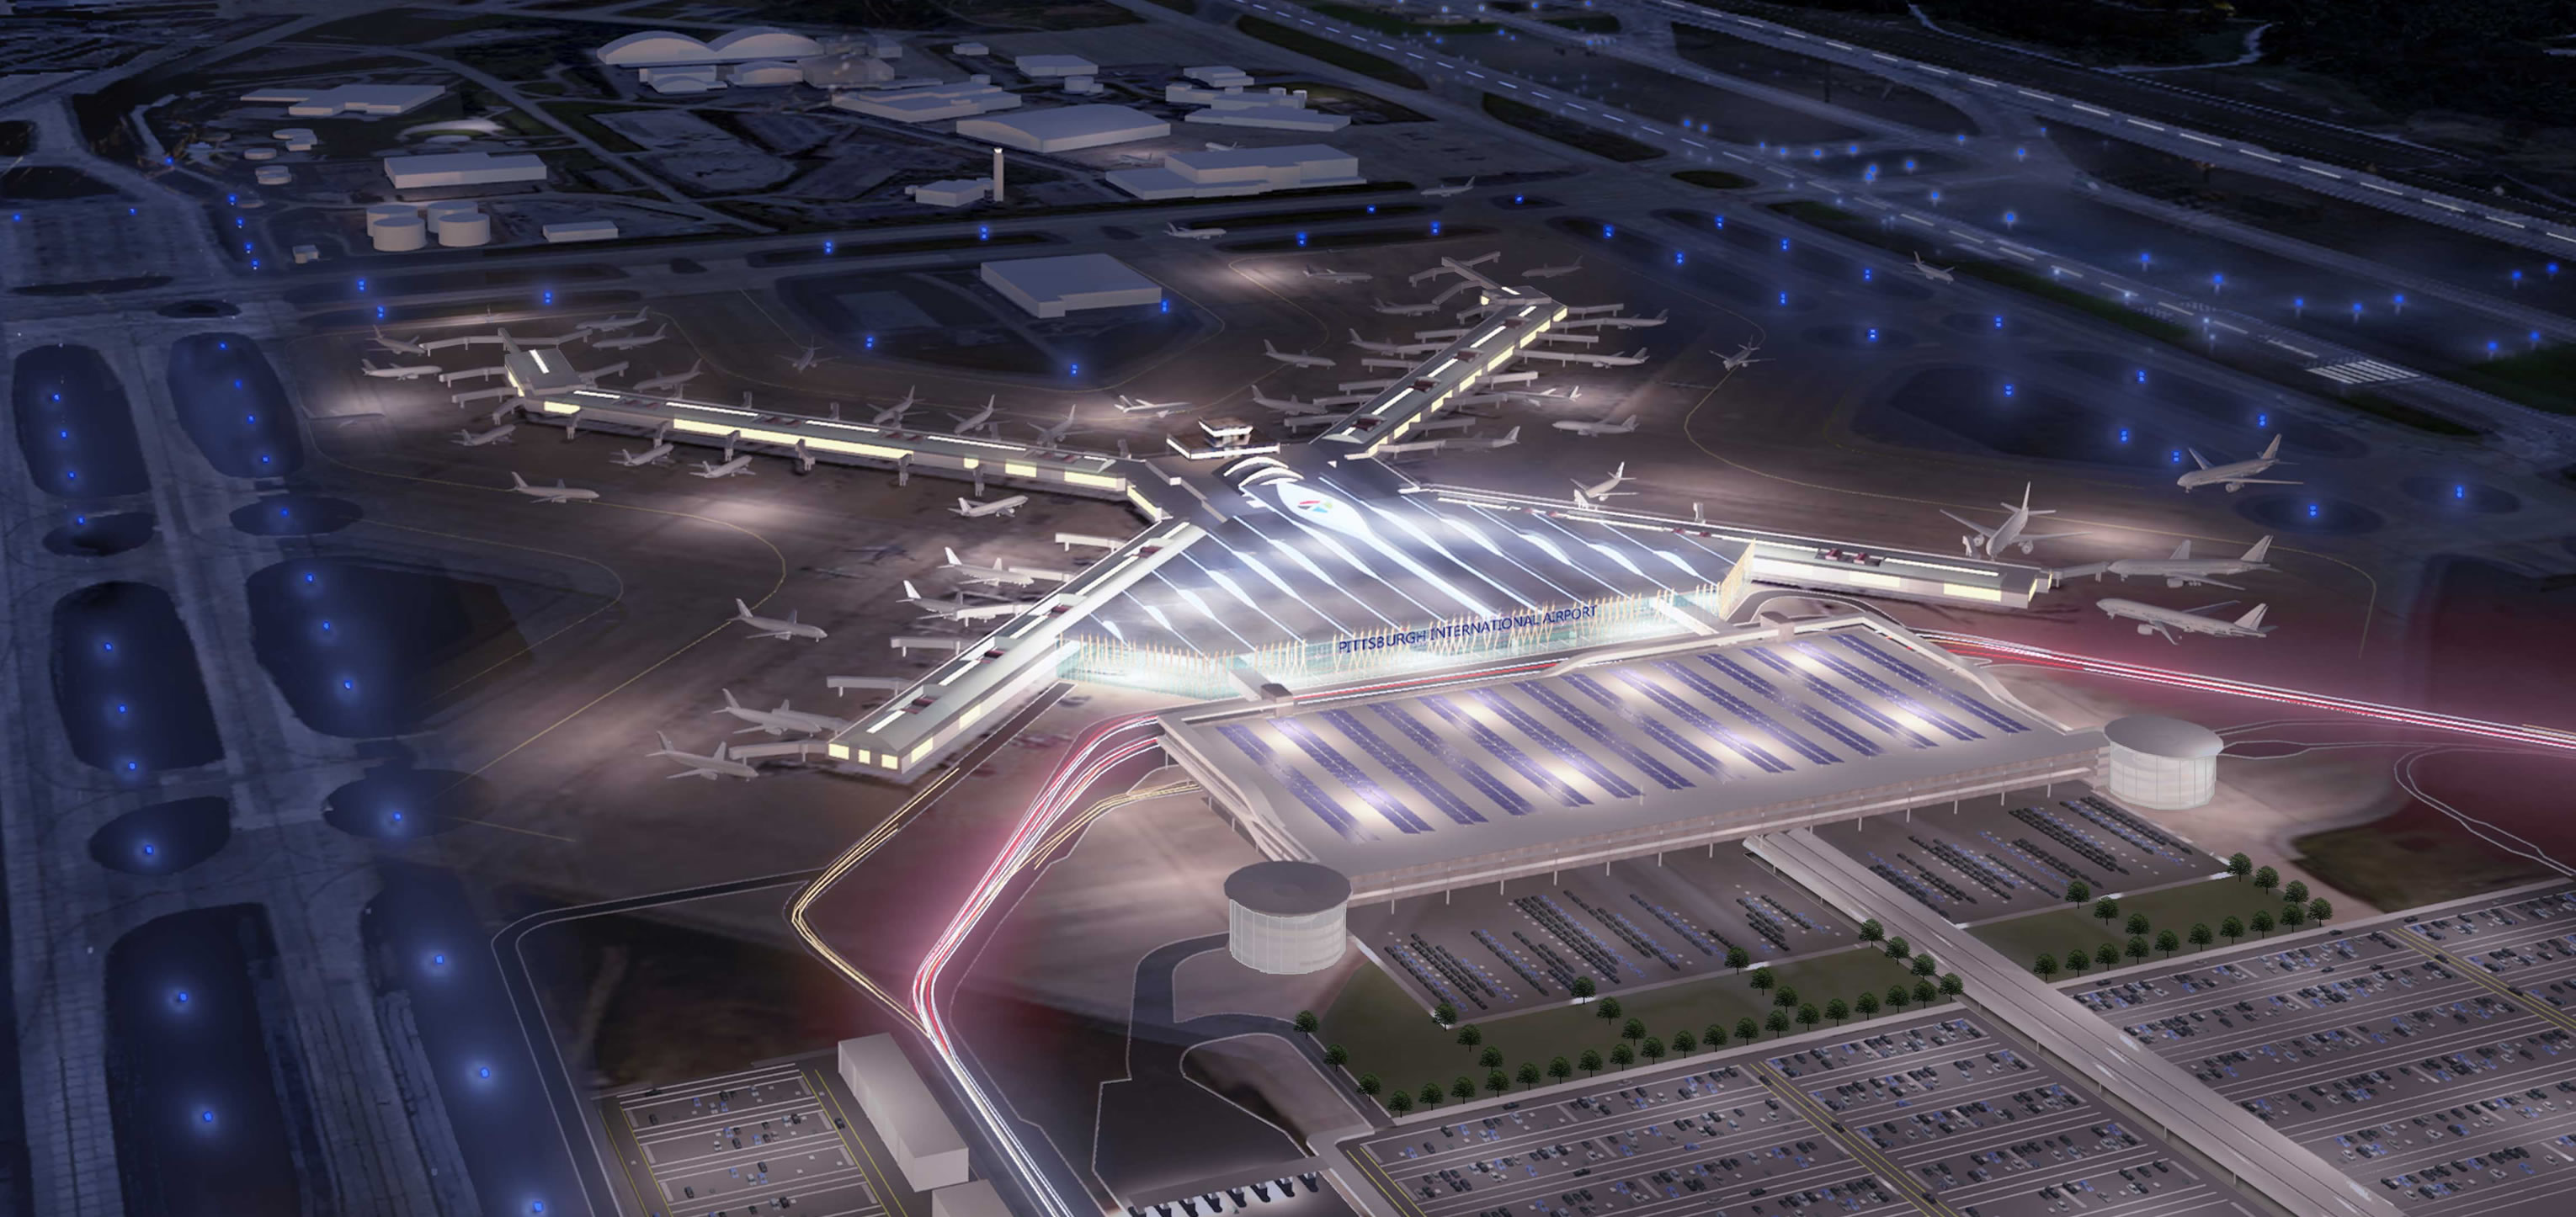 Some Thoughts on Pittsburgh International Airport Terminal Modernization